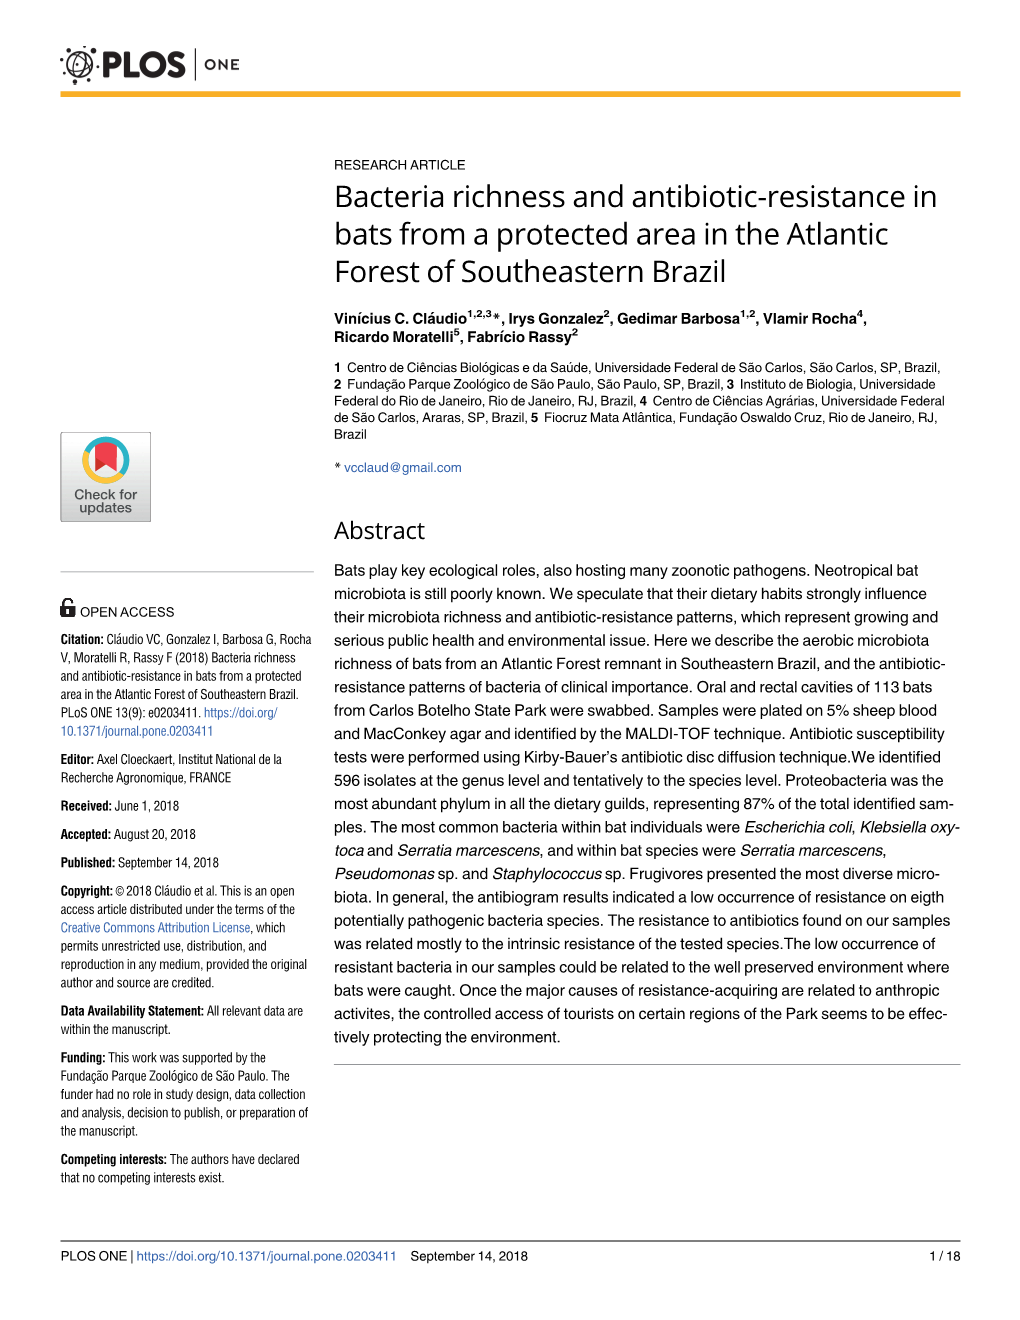 Bacteria Richness and Antibiotic-Resistance in Bats from a Protected Area in the Atlantic Forest of Southeastern Brazil